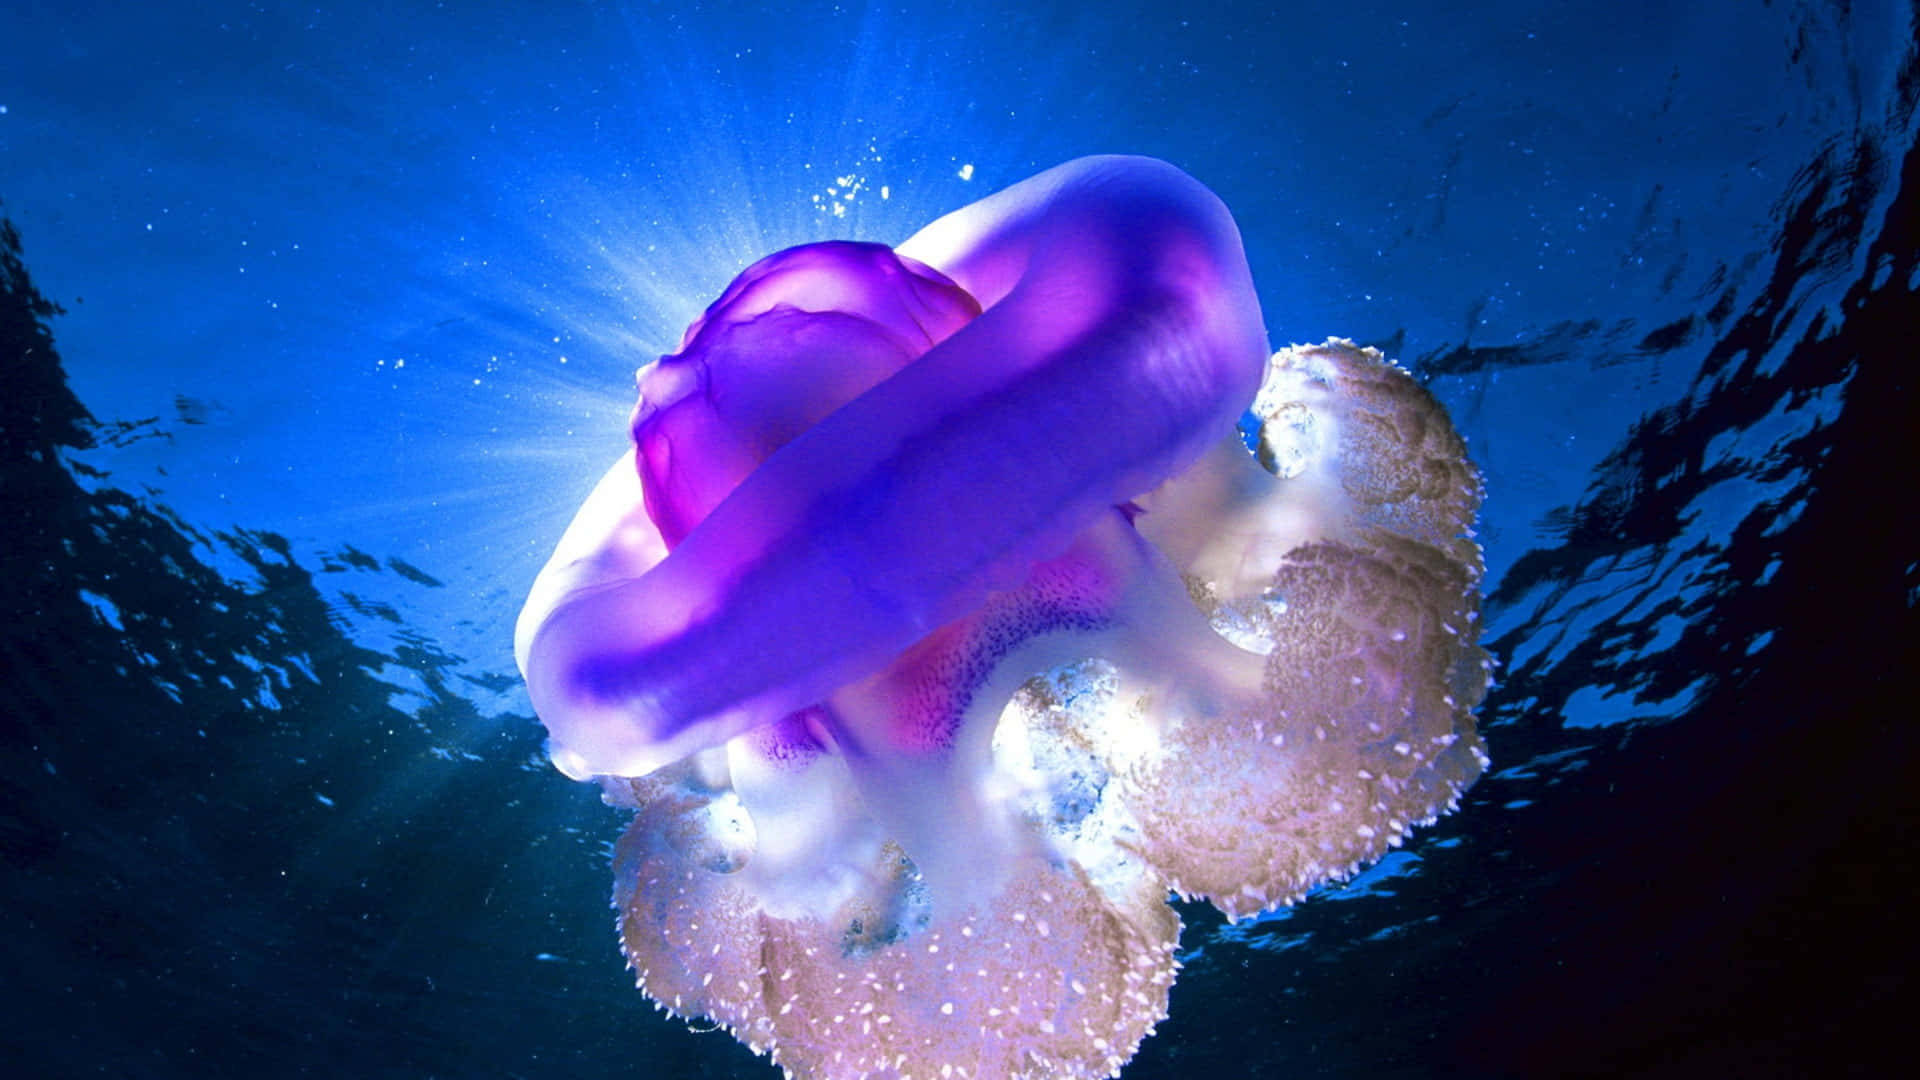 Explore The Wonders Of The Ocean With A 4k Jellyfish Wallpaper